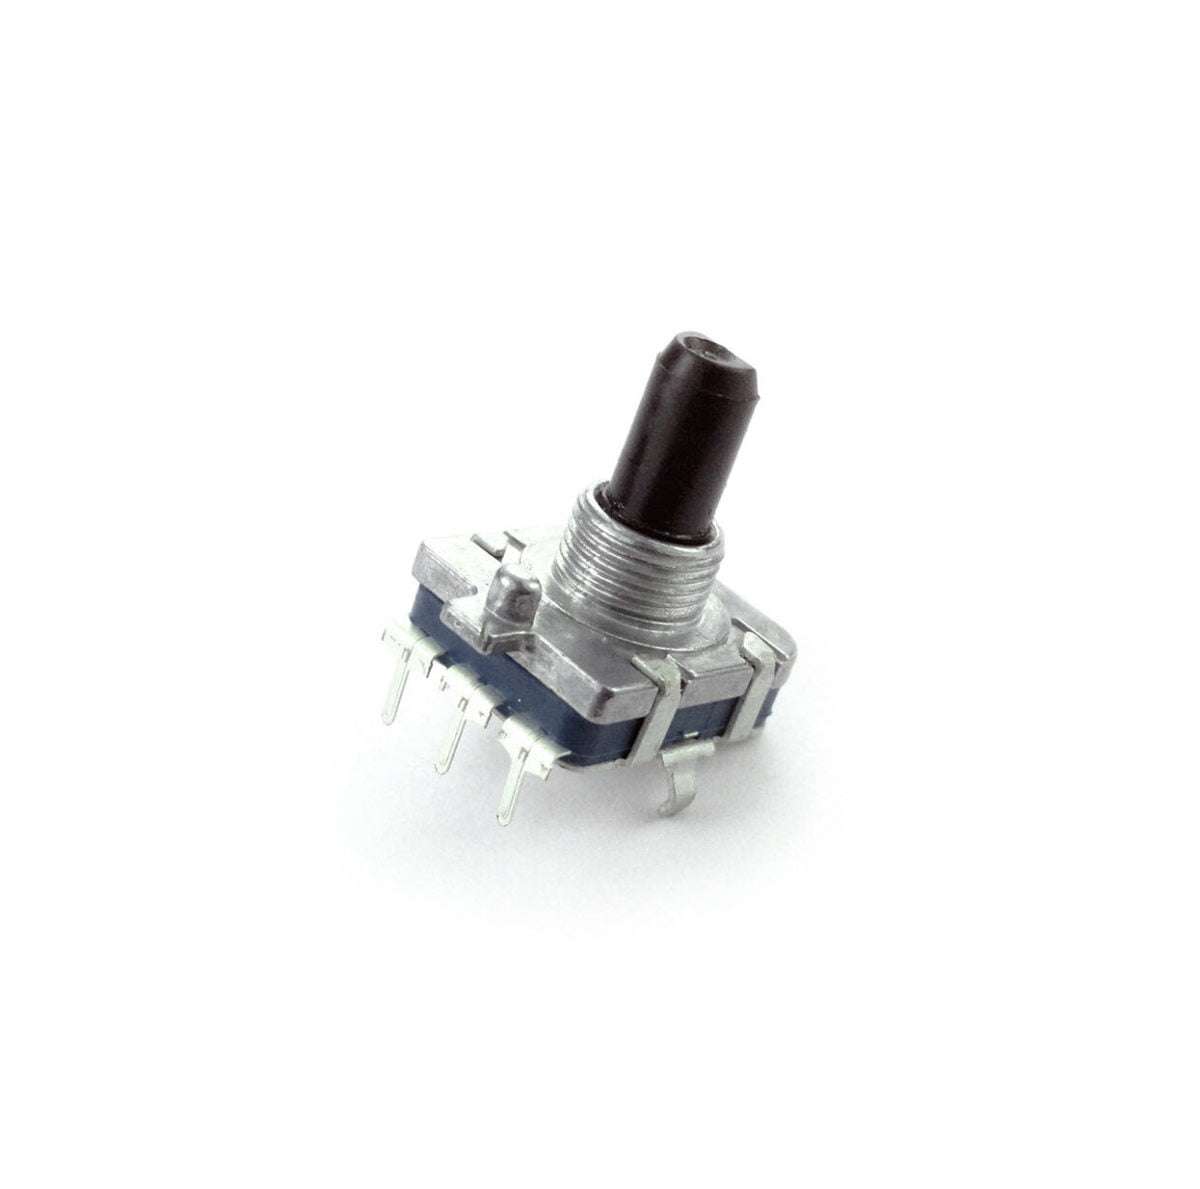 Yamaha S80 Replacement Encoder on a white background